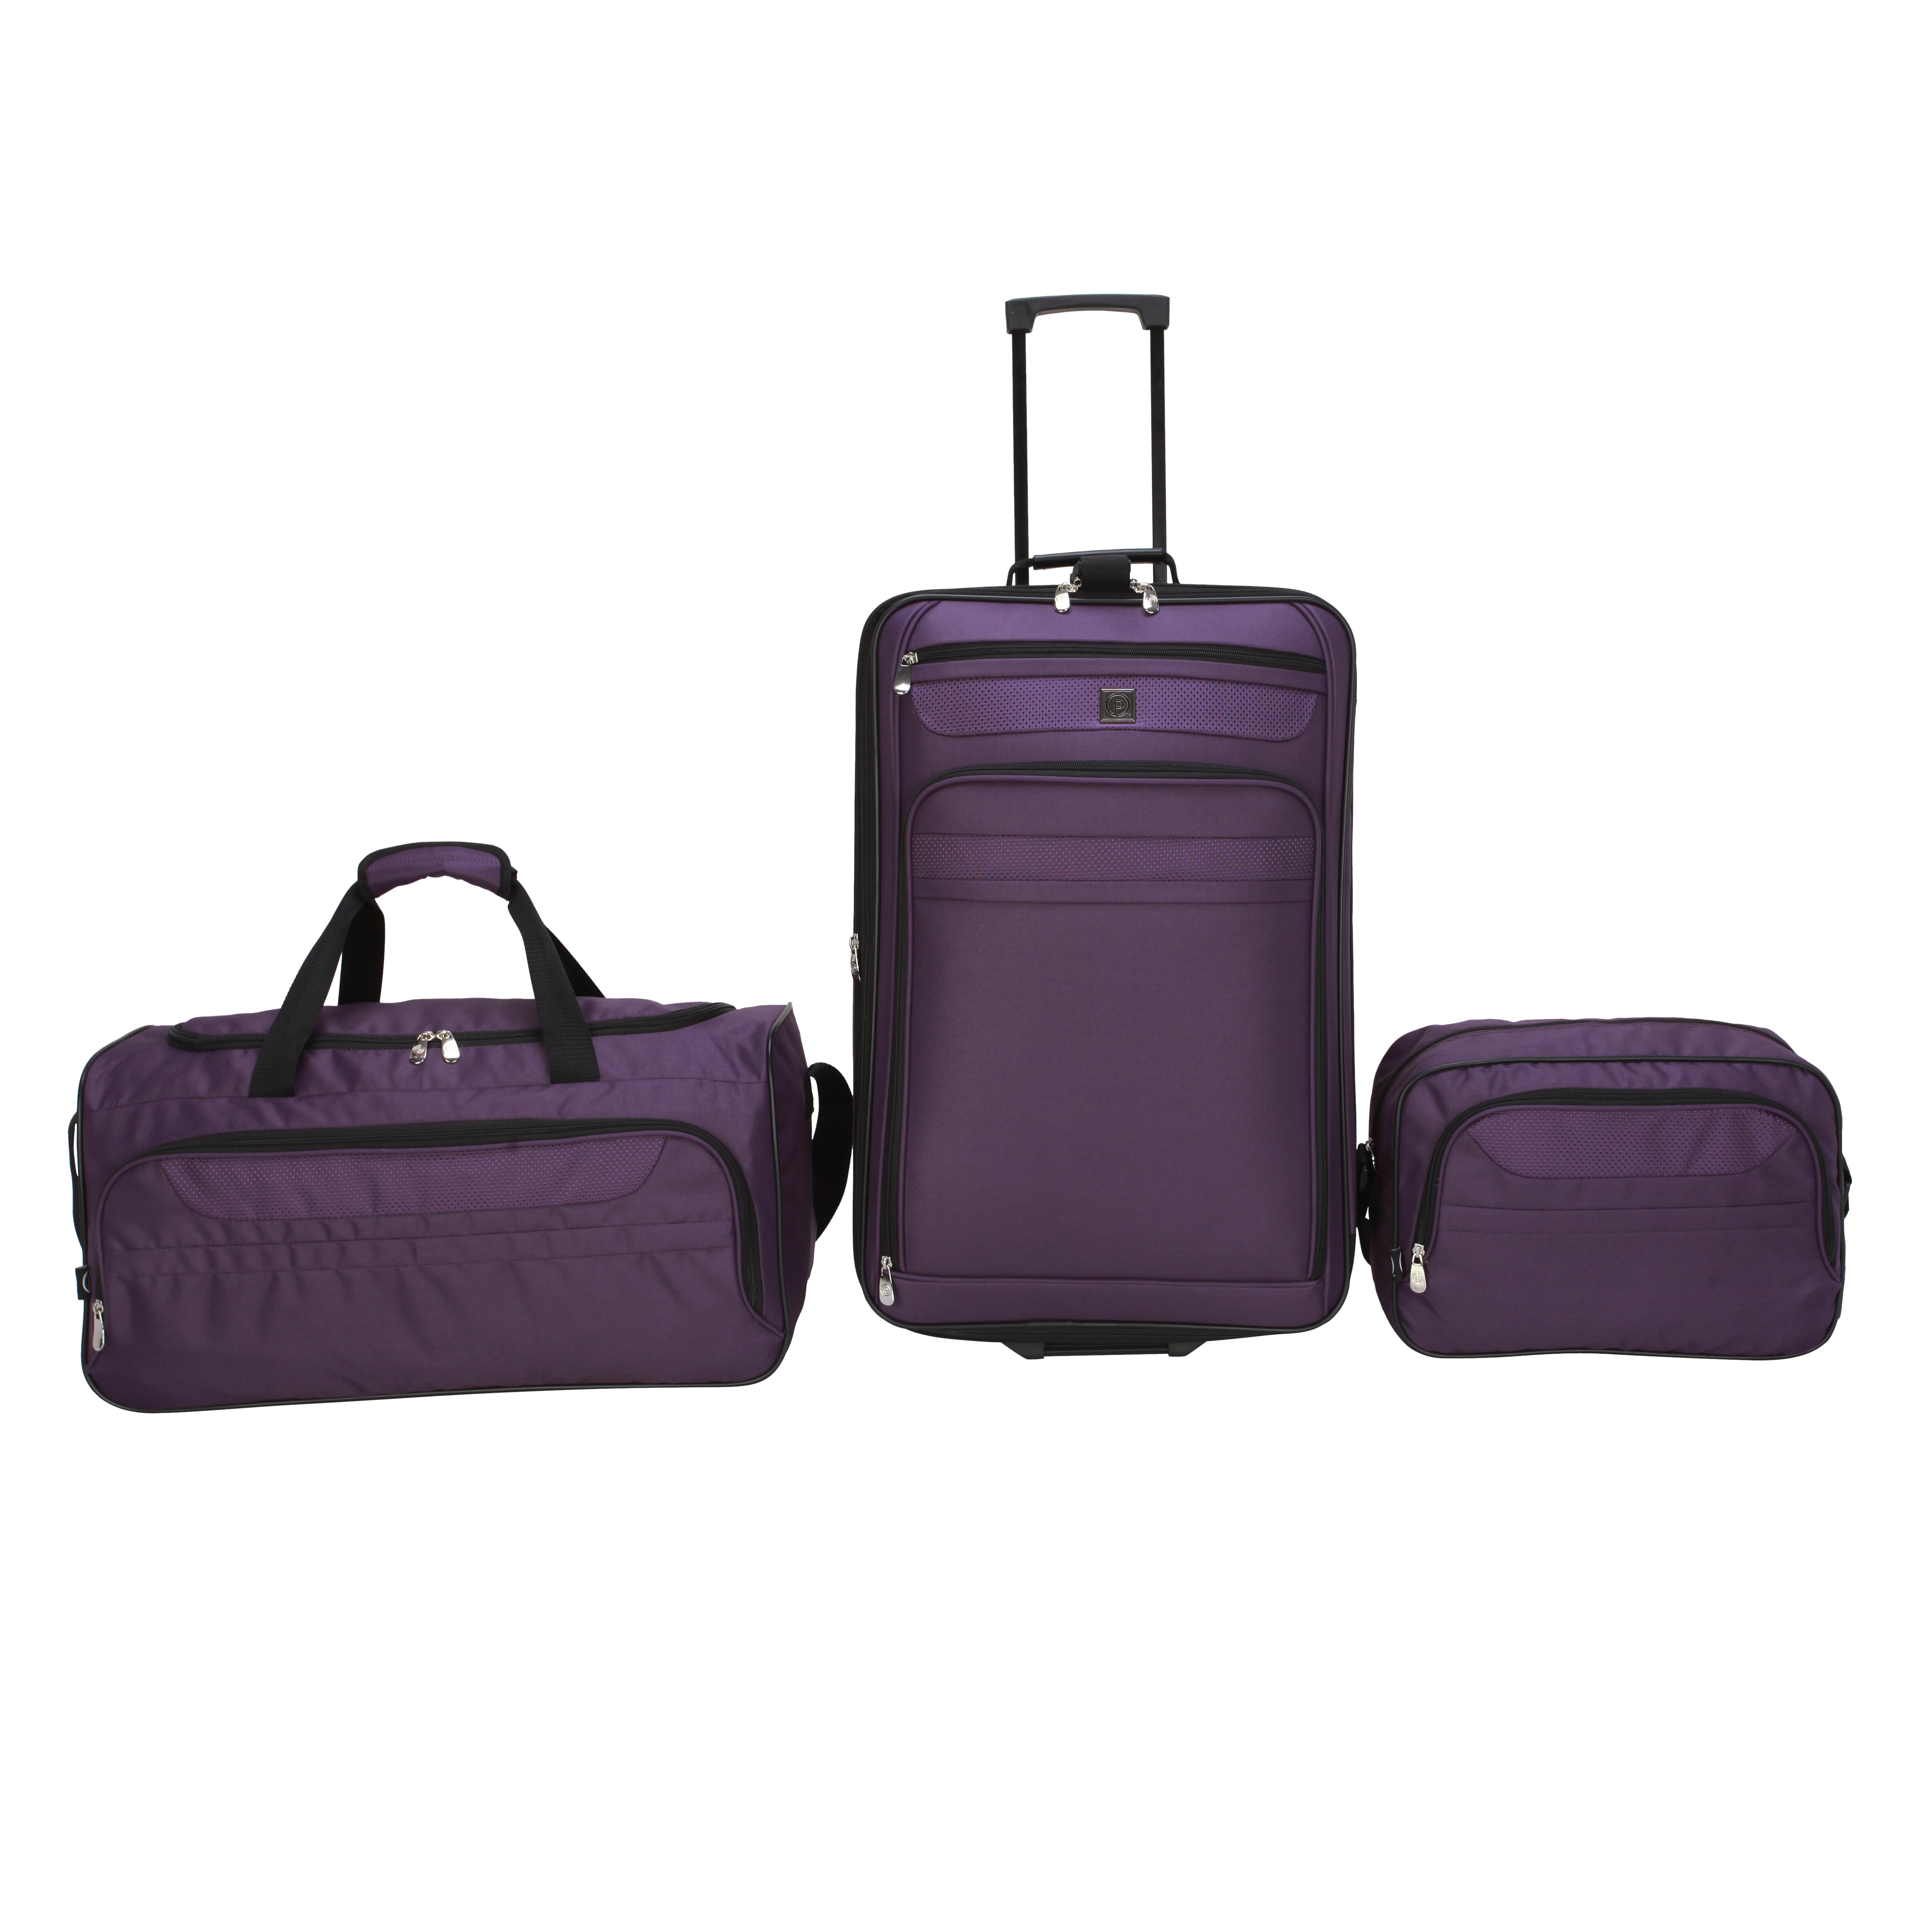 Protege 3 Piece Luggage Travel Set Including Suitcase, Duffel Bag, and Boarding Tote - Purple (Walmart Exclusive), Size: Luggage Set